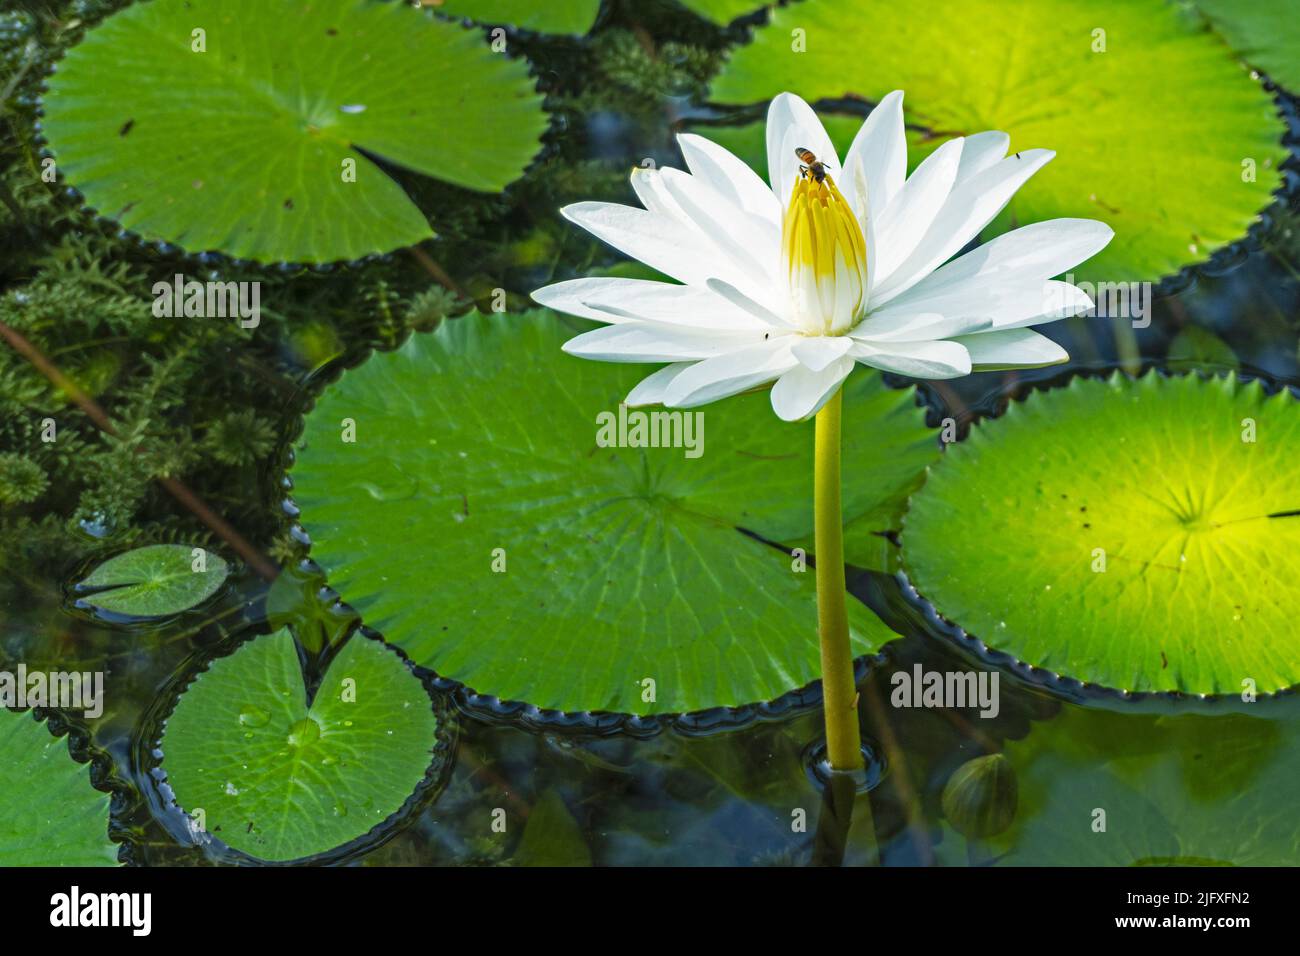 White lotus with yellow pollen on the surface of the pond Stock Photo